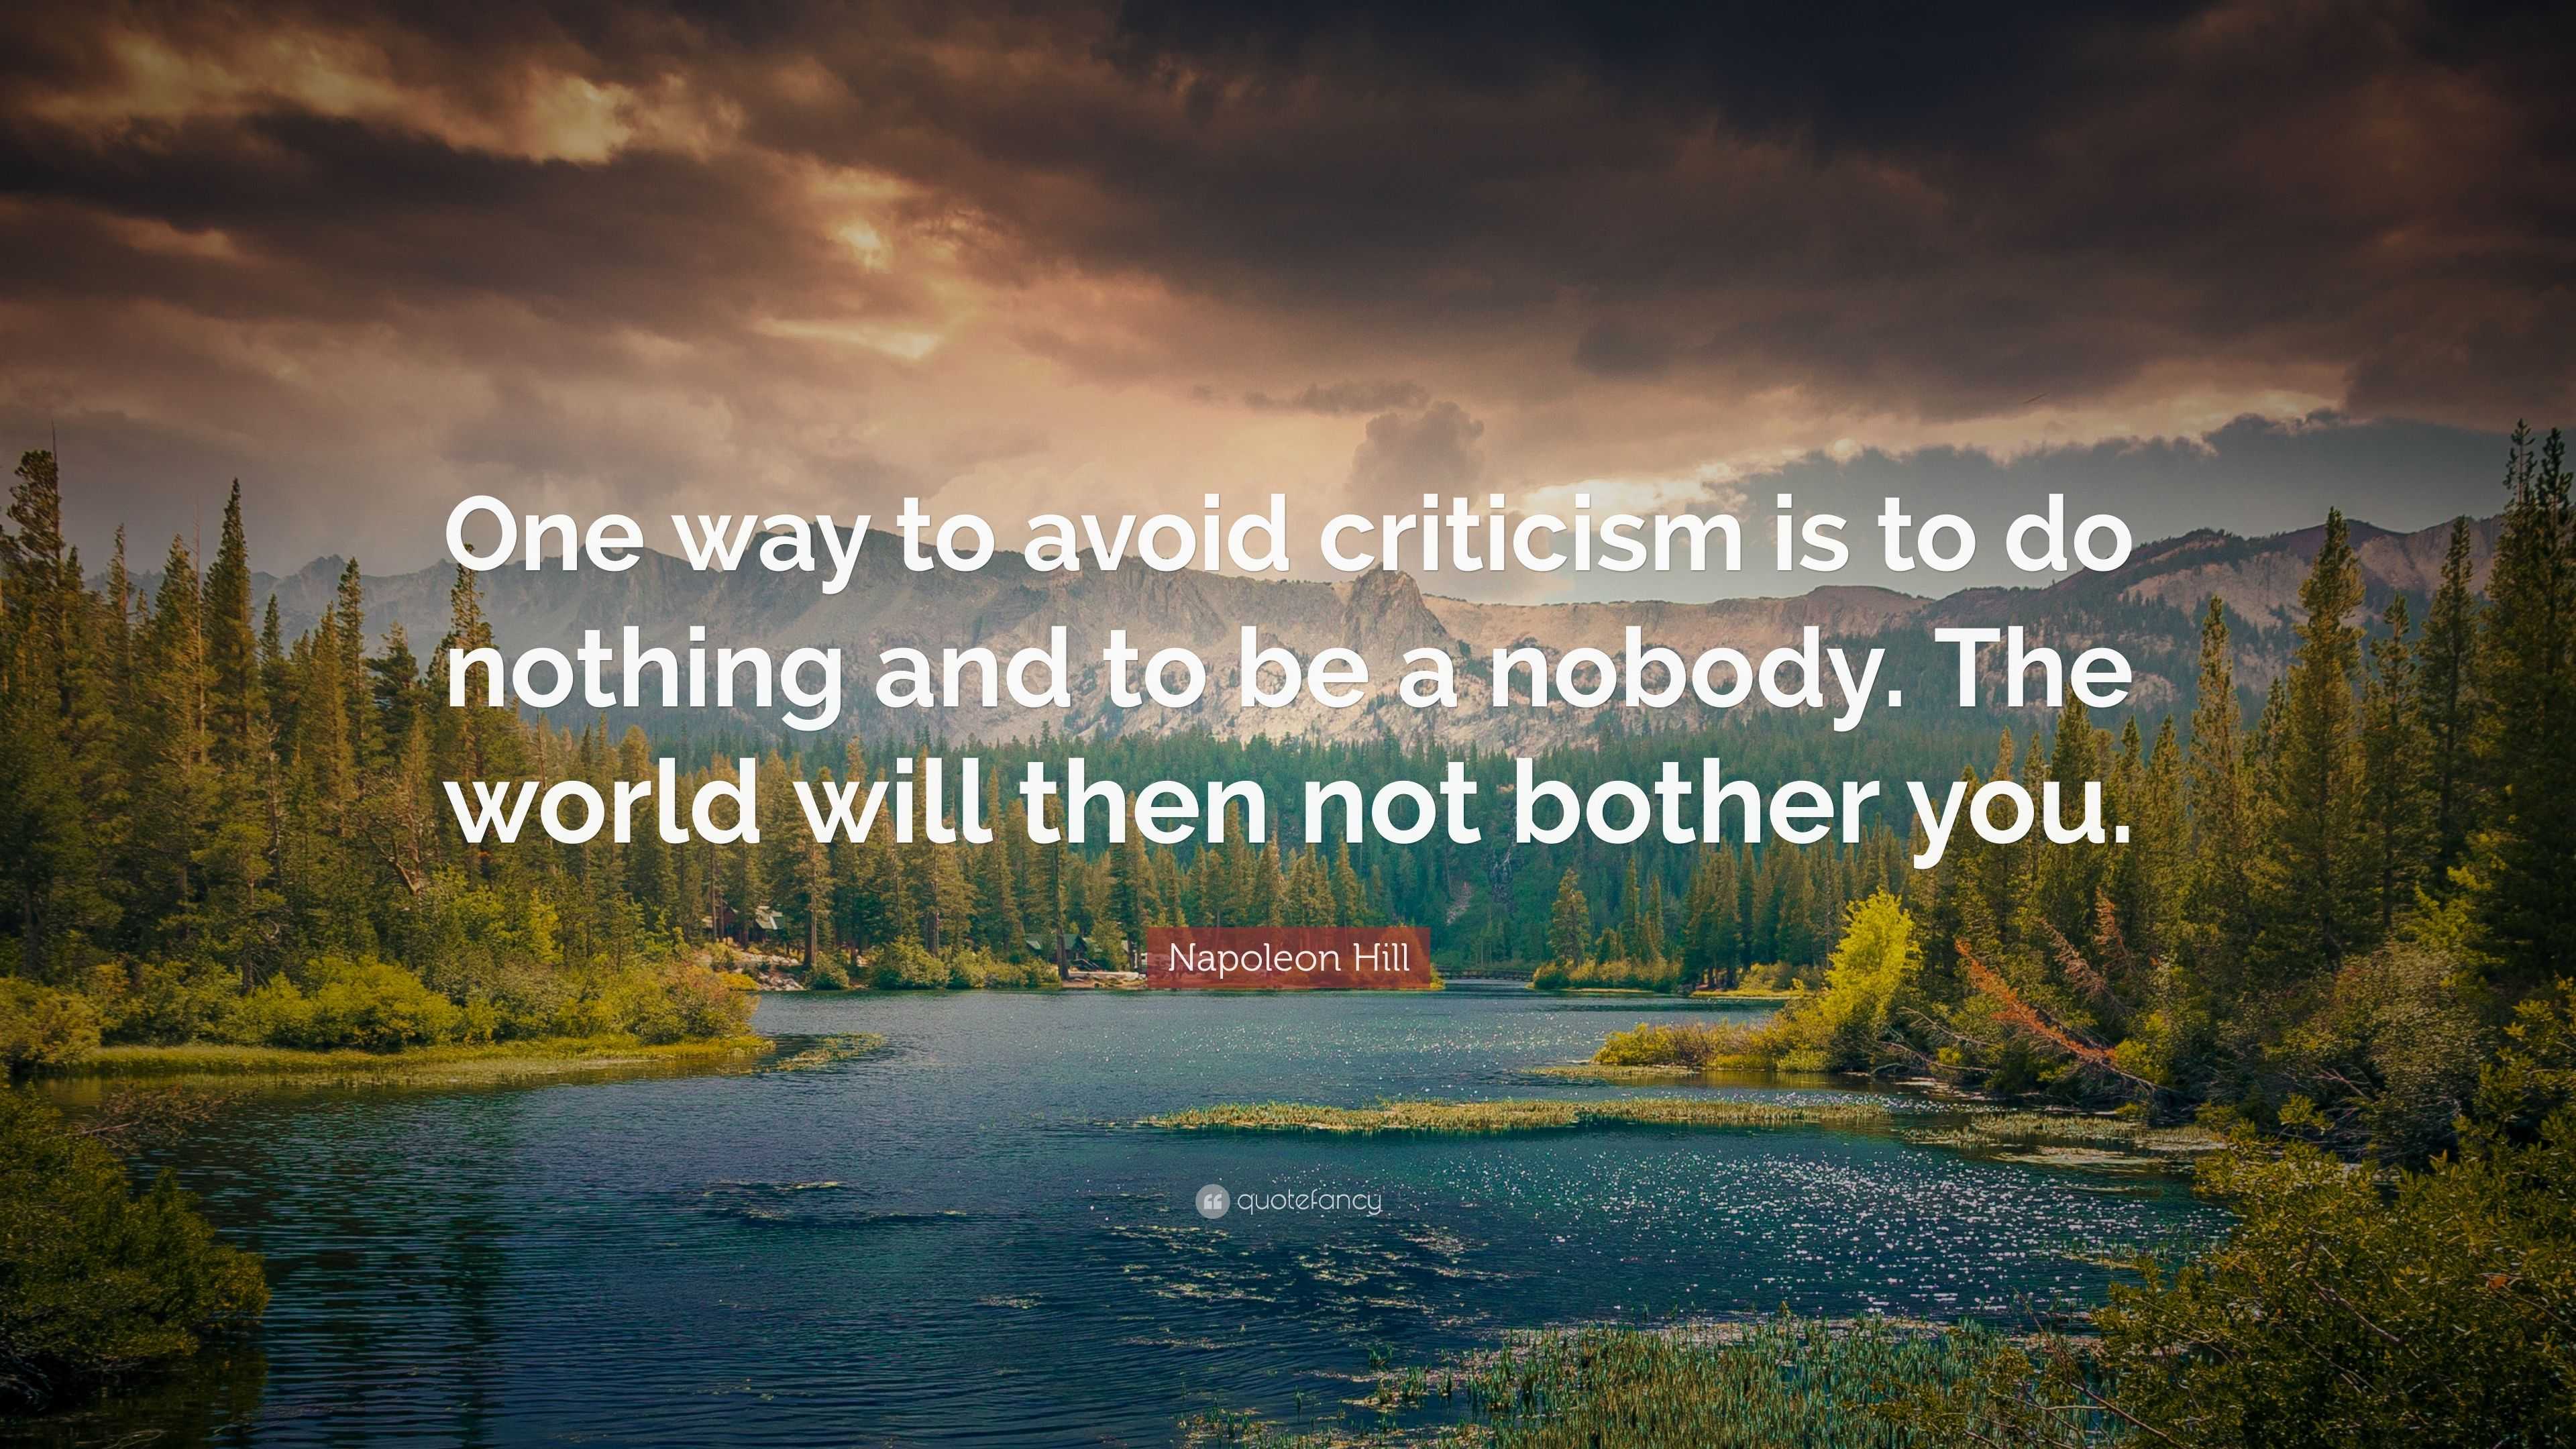 Napoleon Hill Quote: “One way to avoid criticism is to do nothing and